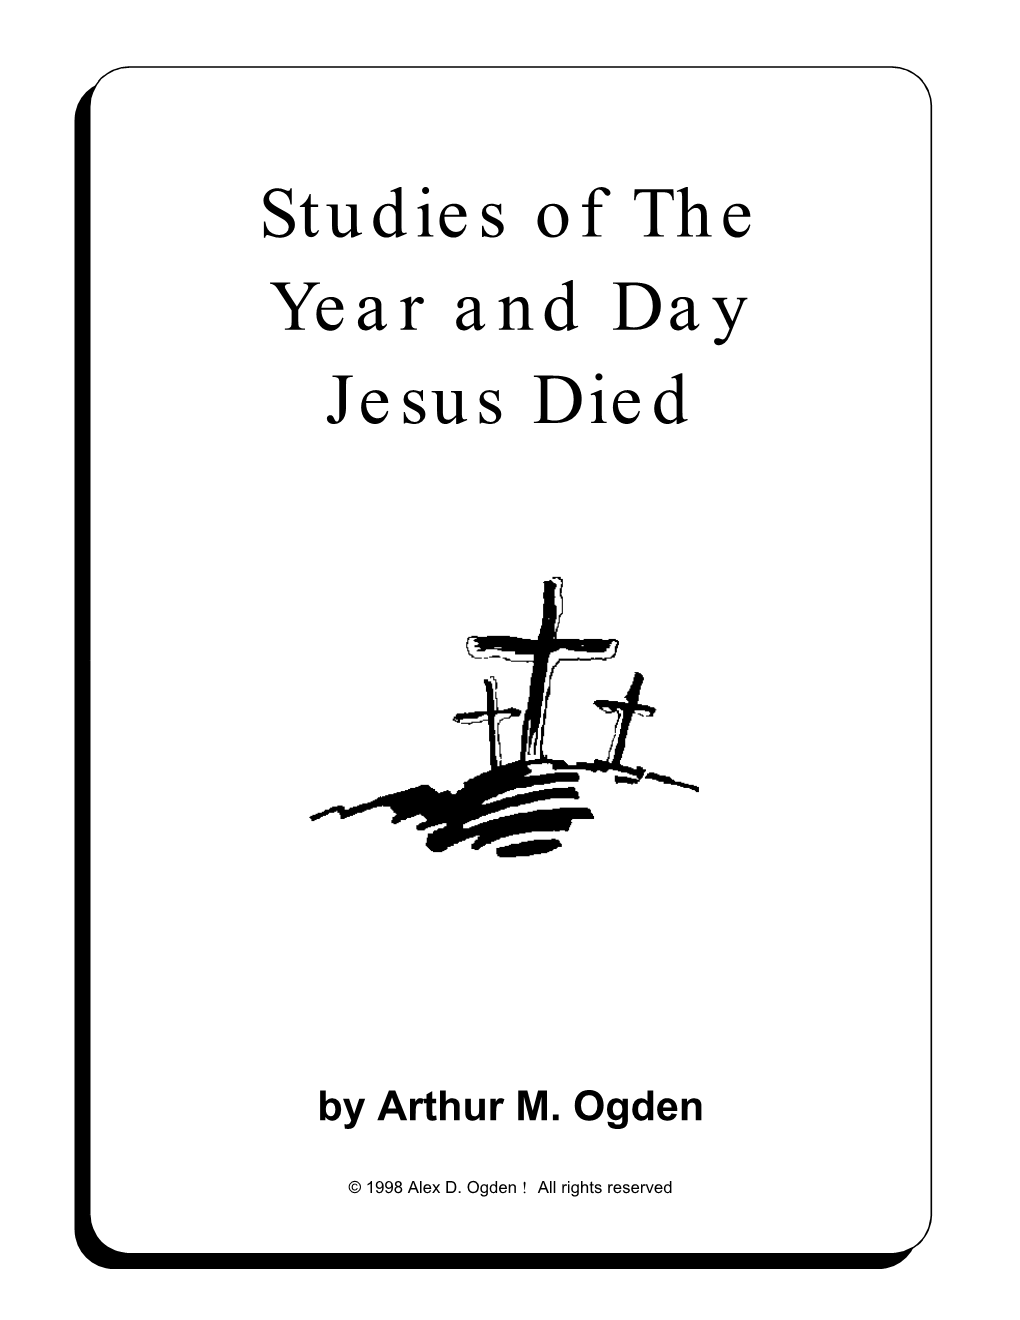 Studies of the Year and Day Jesus Died